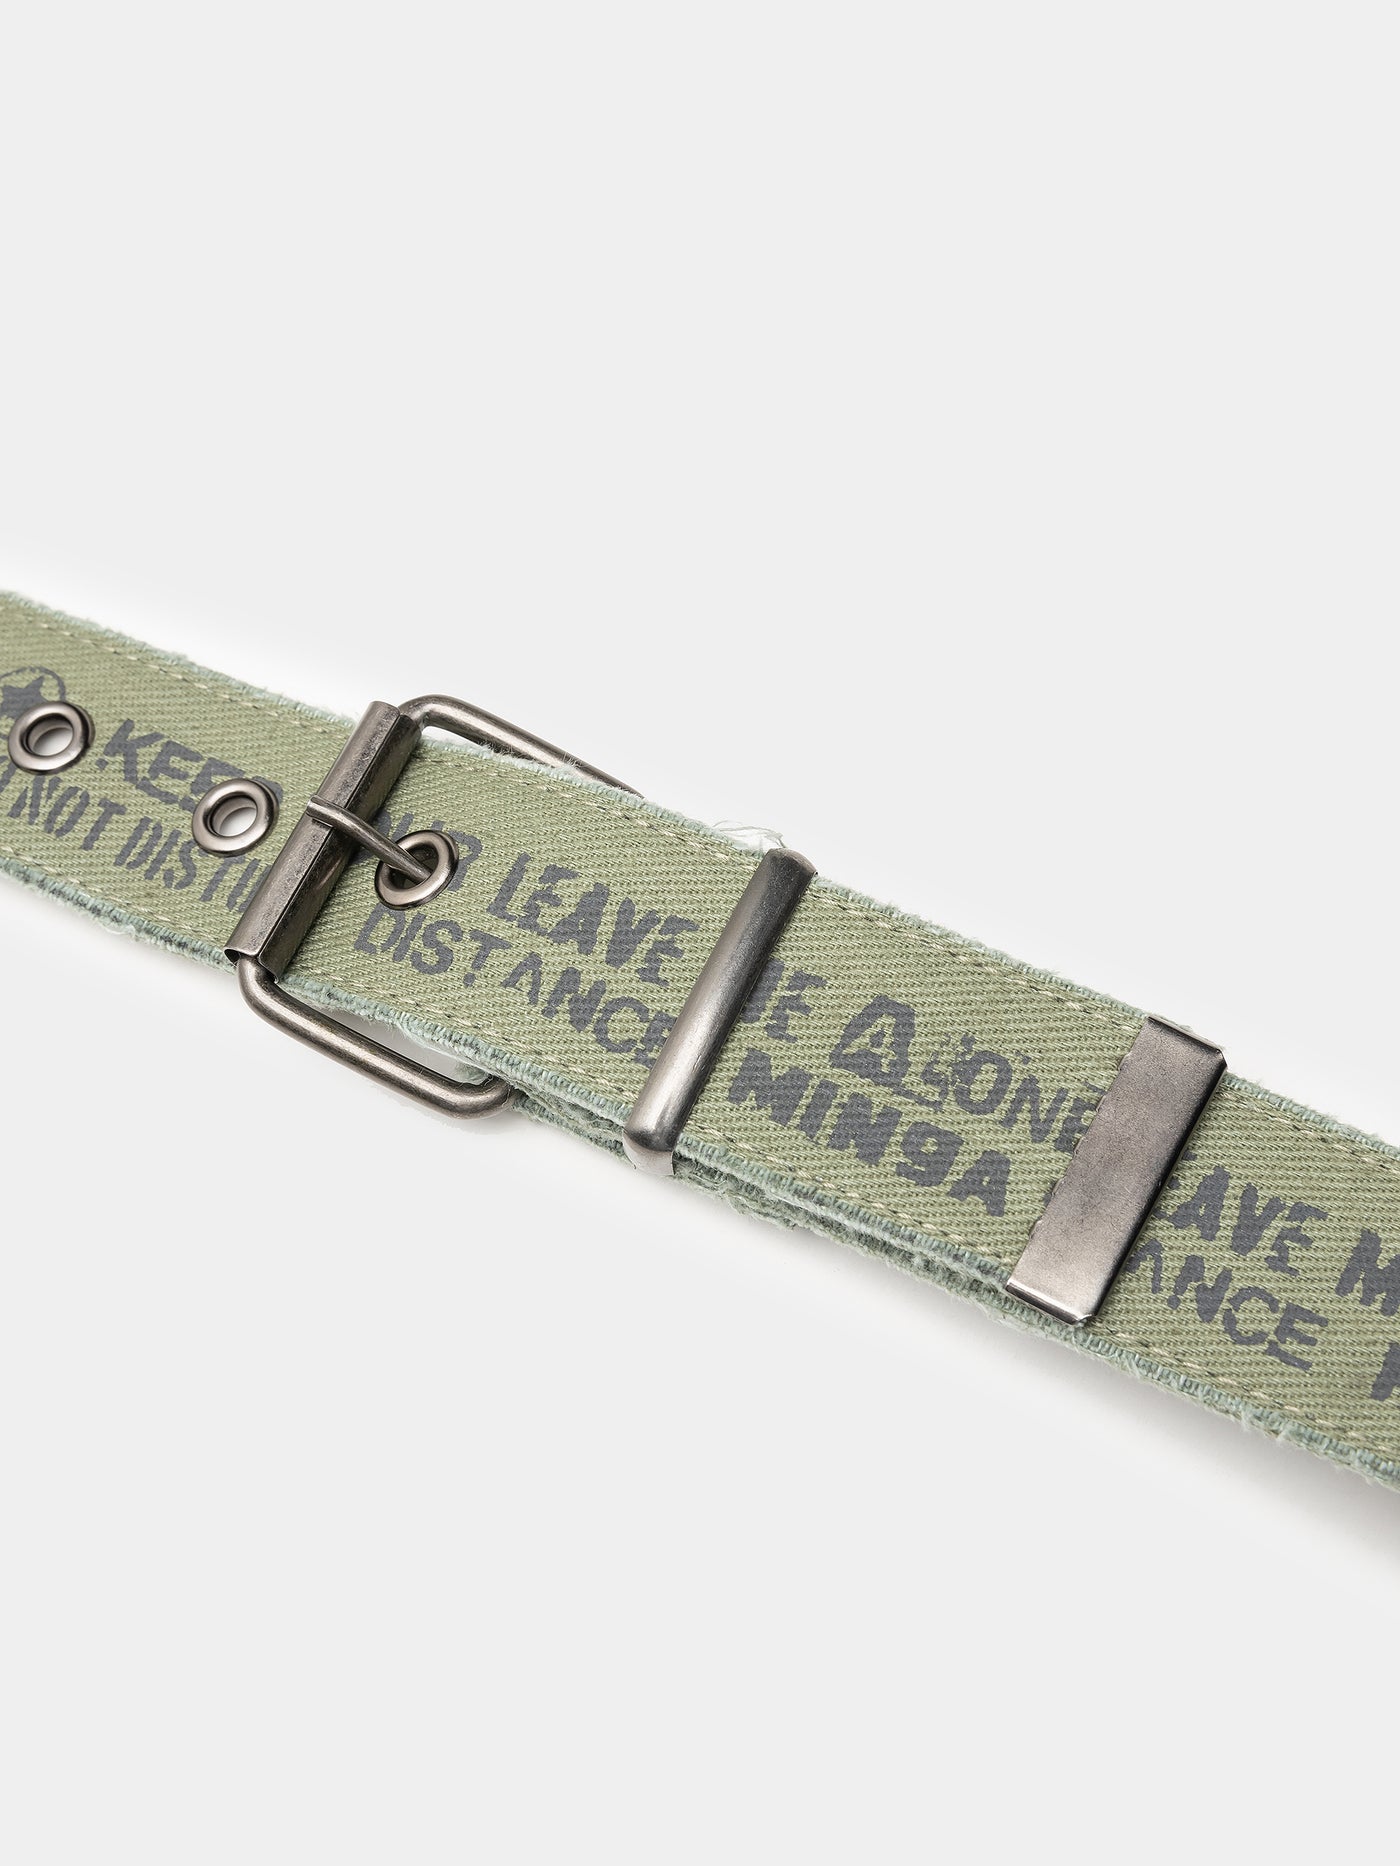 Green Army Distressed Canvas Belt with Printed quotes - Y2K Army